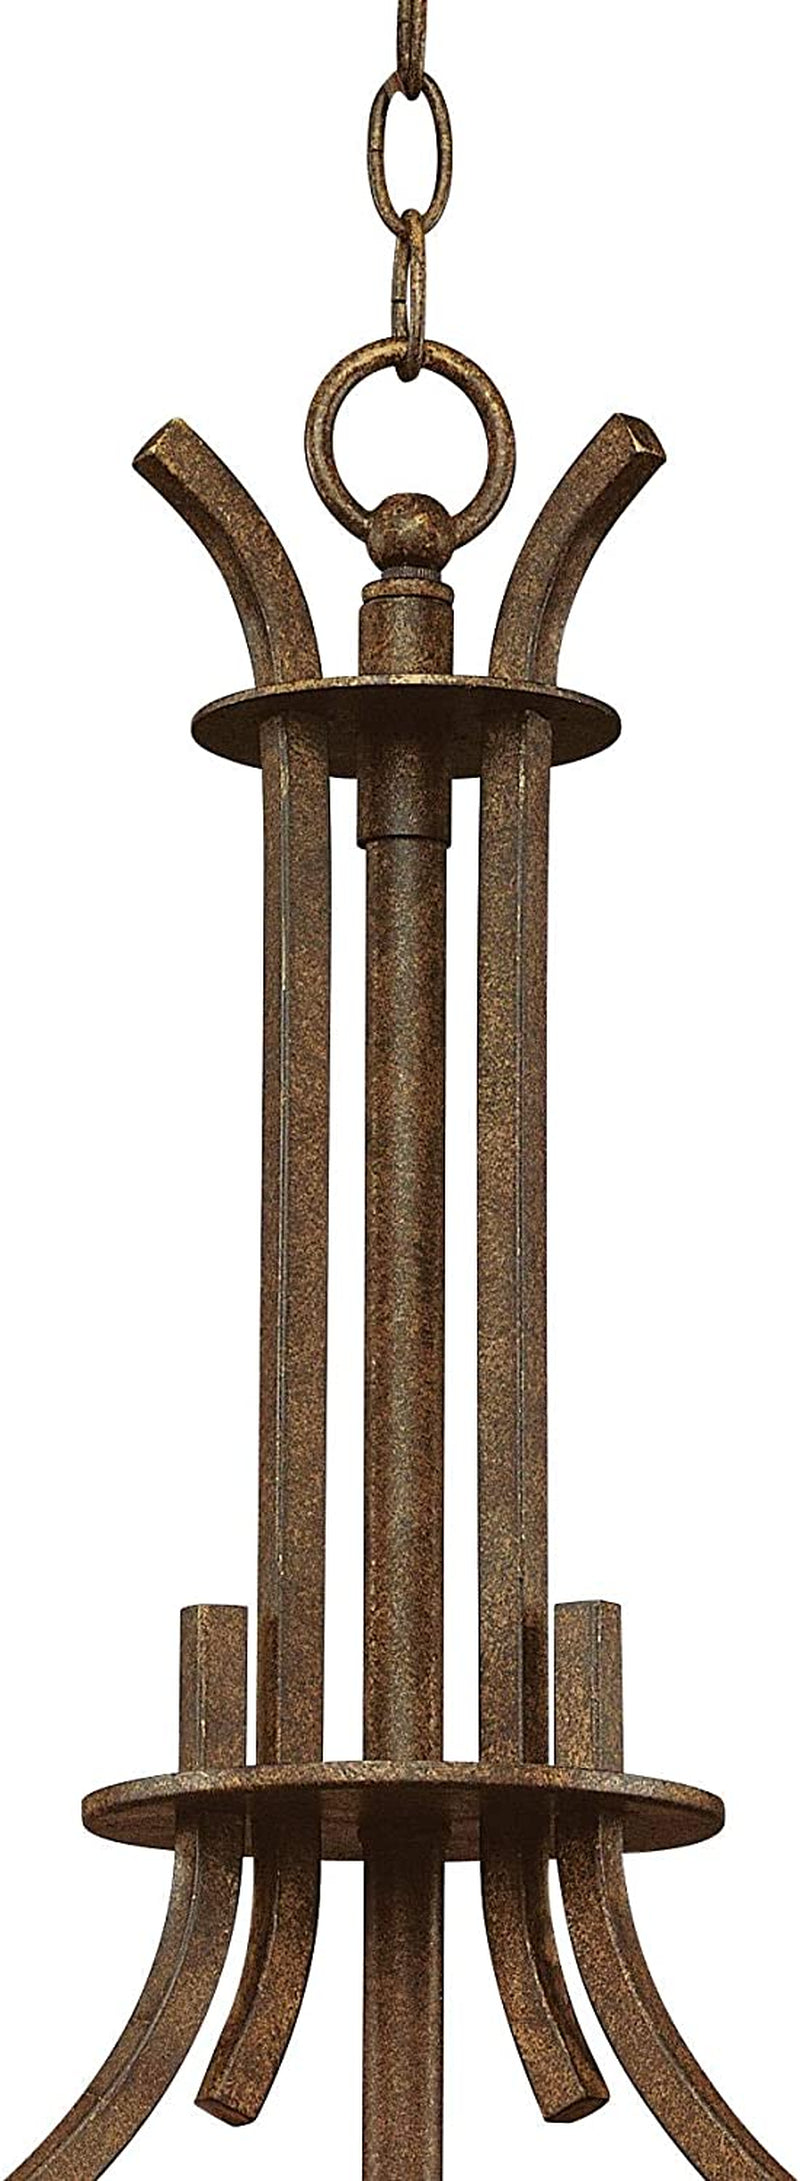 Oak Valley Rustic Bronze Pendant Chandelier 21" Wide Farmhouse Cream Scavo Glass Bowl 5-Light Fixture for Dining Room House Foyer Kitchen Island Entryway Bedroom Living Room - Franklin Iron Works Home & Garden > Lighting > Lighting Fixtures > Chandeliers Franklin Iron Works   